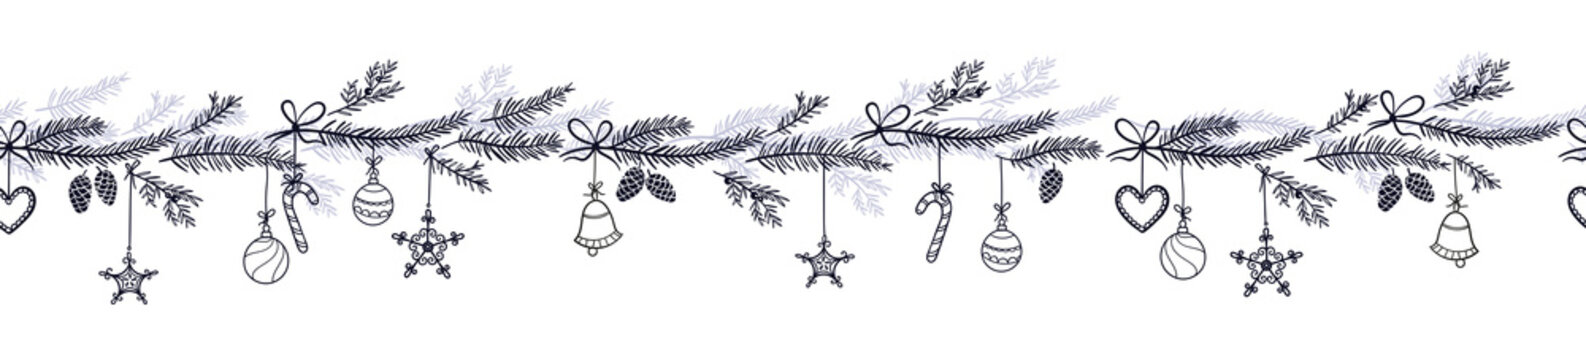 Cute hand drawn horizontal seamless pattern with fir branches and hanging decoration, great for christmas banners, wallpapers, wrapping, textiles - vector design